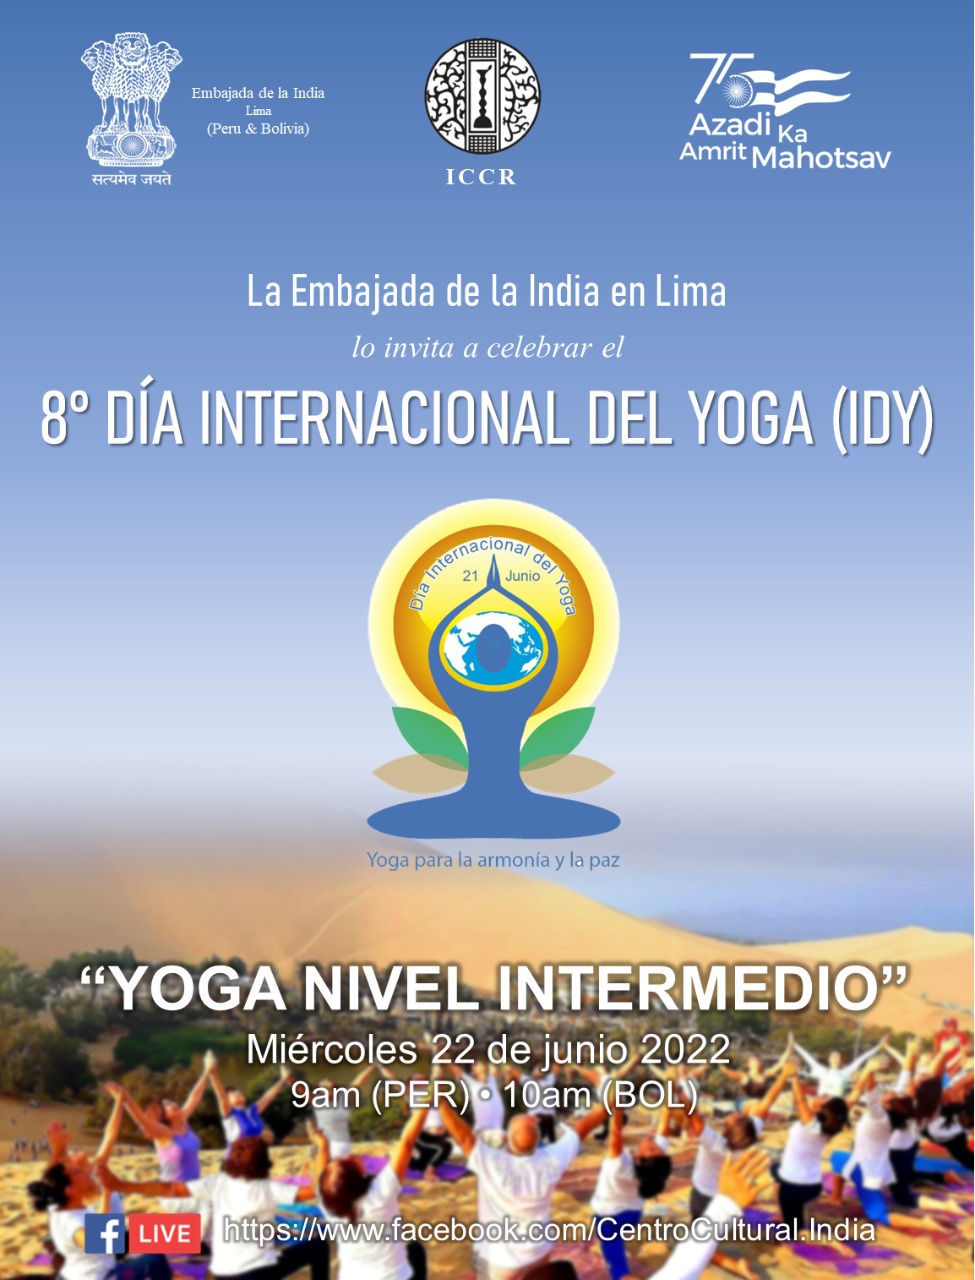 Celebration of 8th International Day of Yoga 2022 - Event on Yoga for Intermediate practitioners organised by Embassy of India, Lima